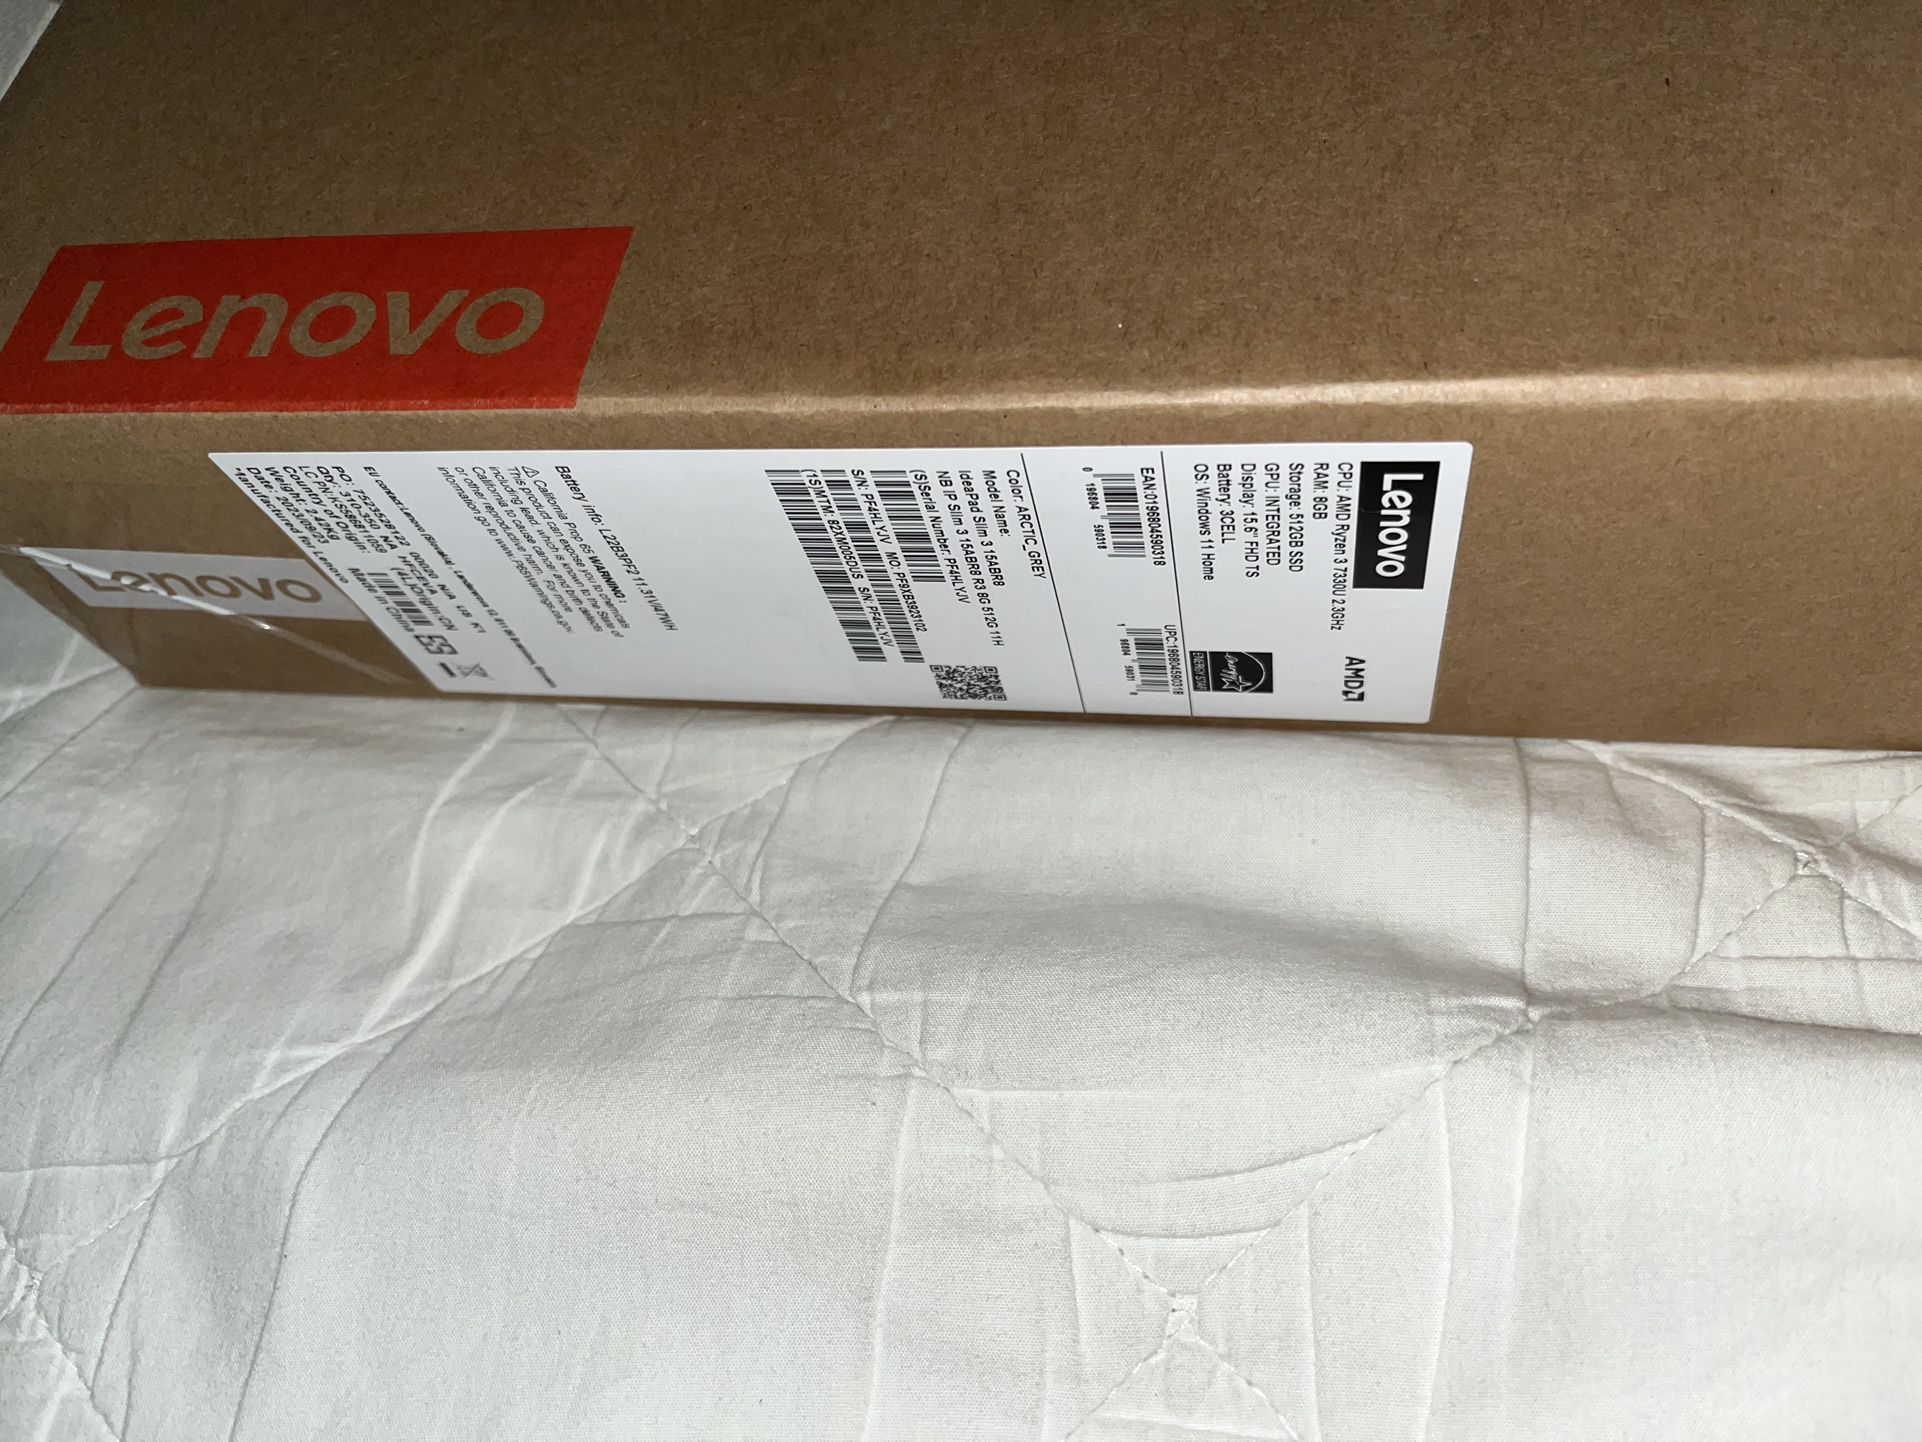 Touch Screen Brand New Never Open Lenovo Laptop thin 